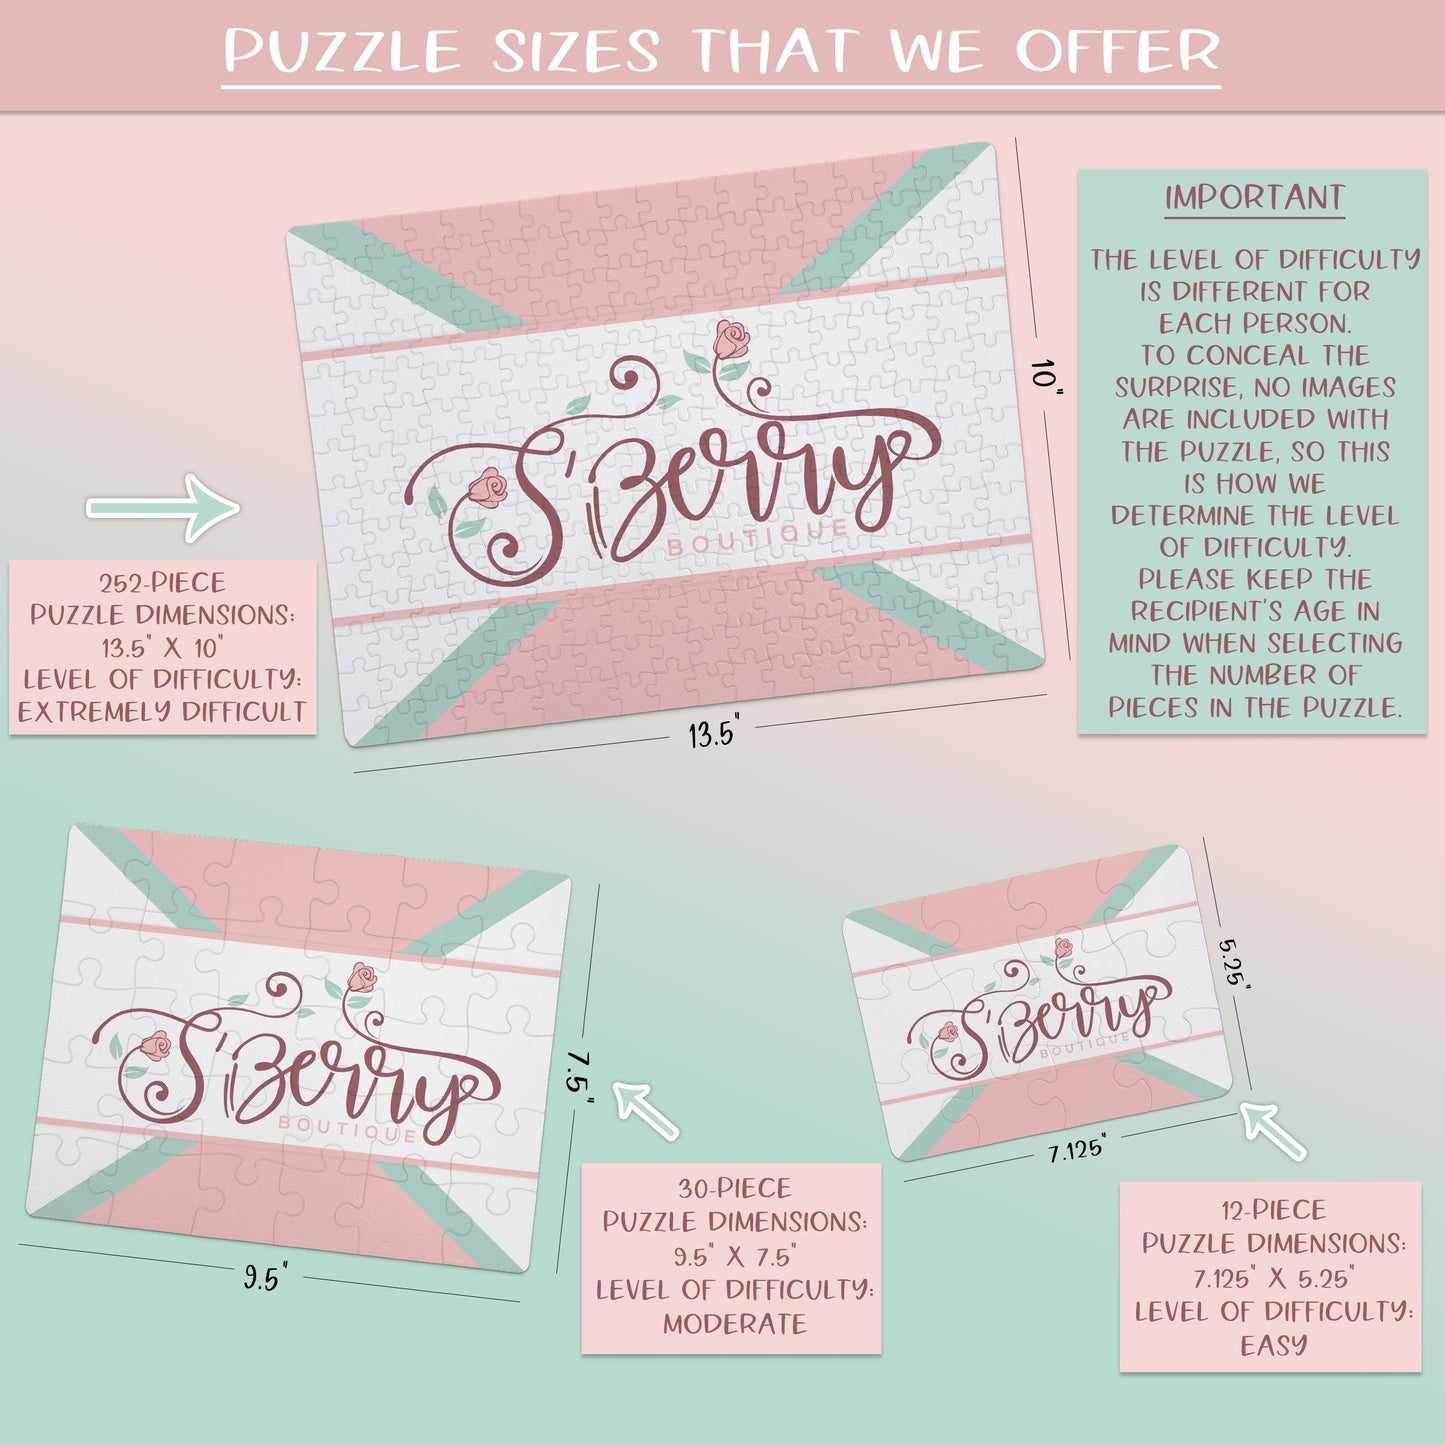 Create Your Own Puzzle - Arrow Design - CYOP0233 | S'Berry Boutique